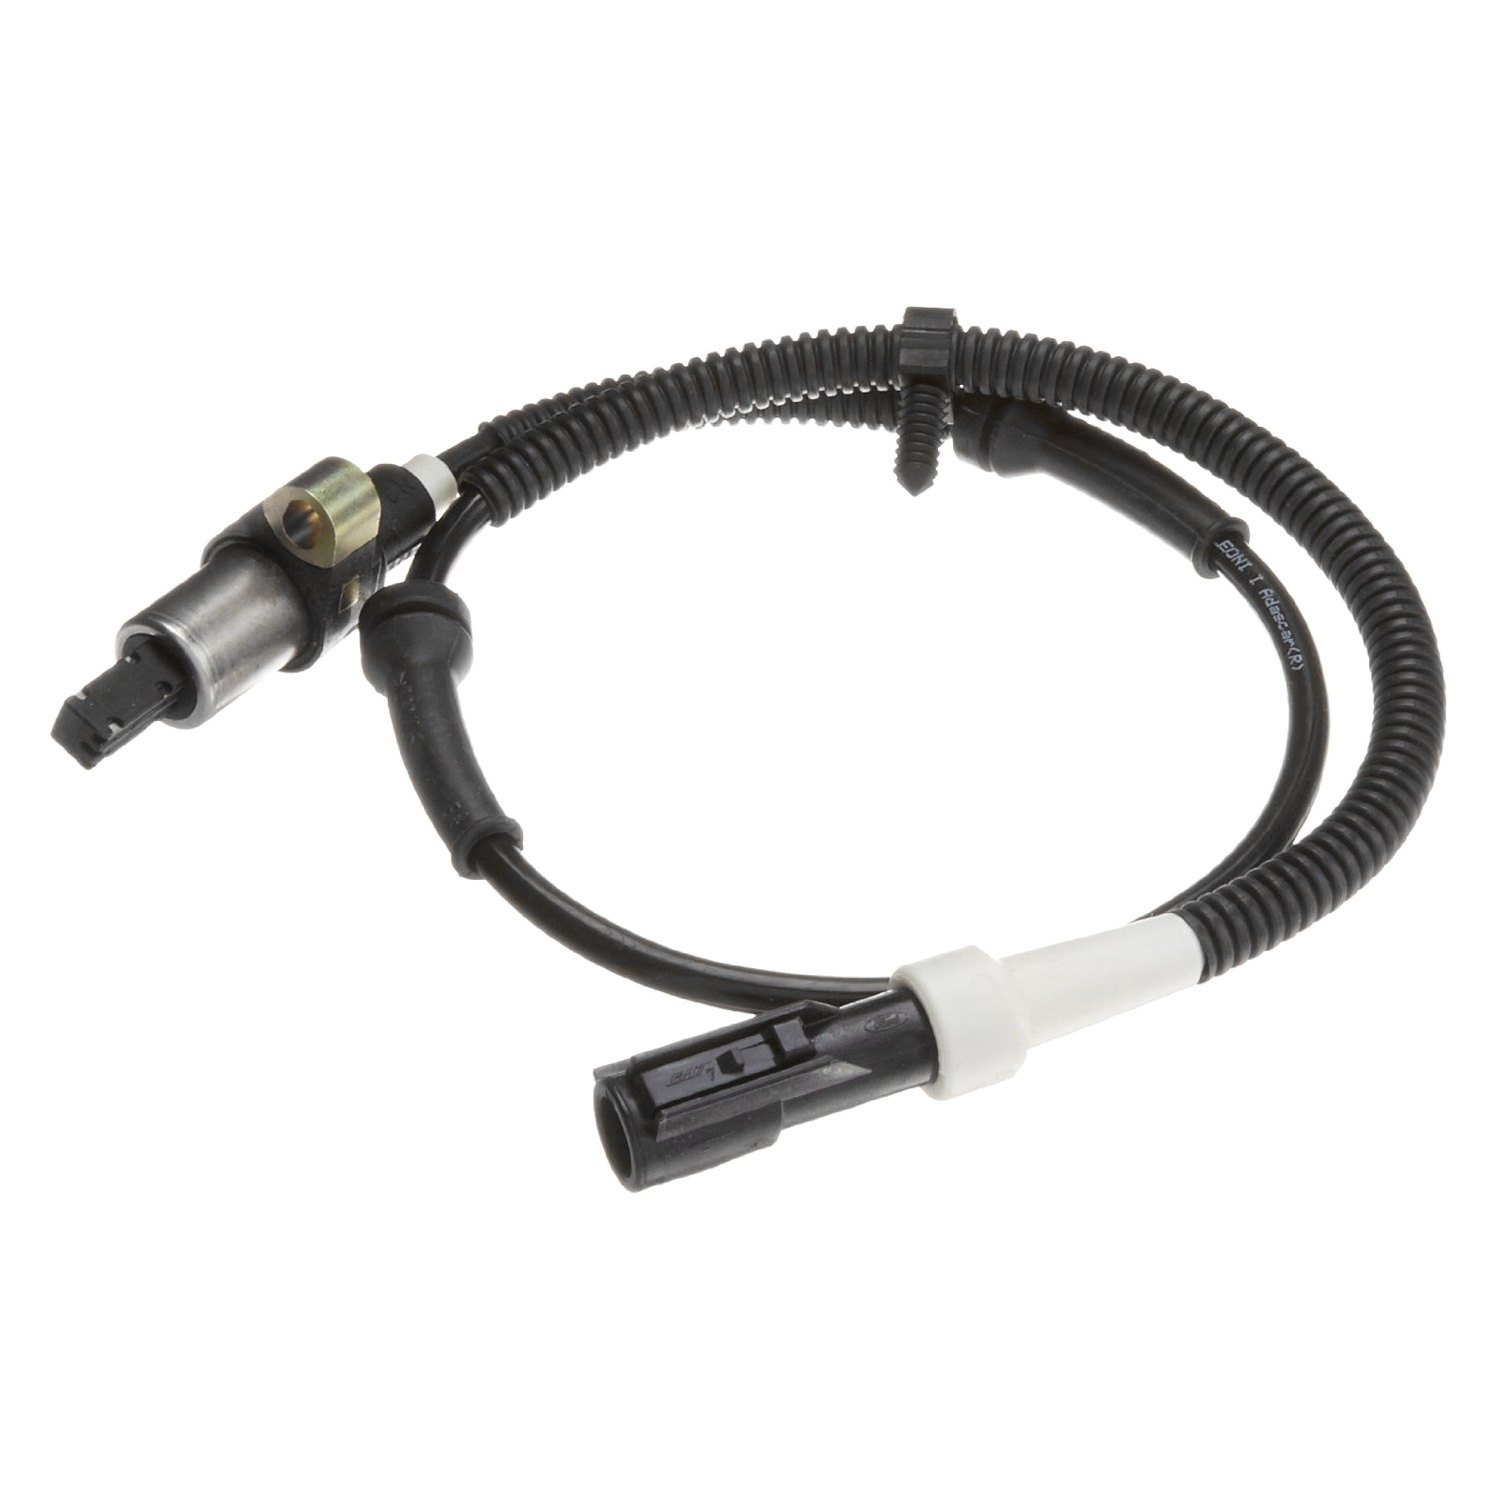 Brand New ABS Wheel Speed Sensor For 1998-2003 Ford Mercury and Lincoln Front Left Or Right Oem Fit ABS727 